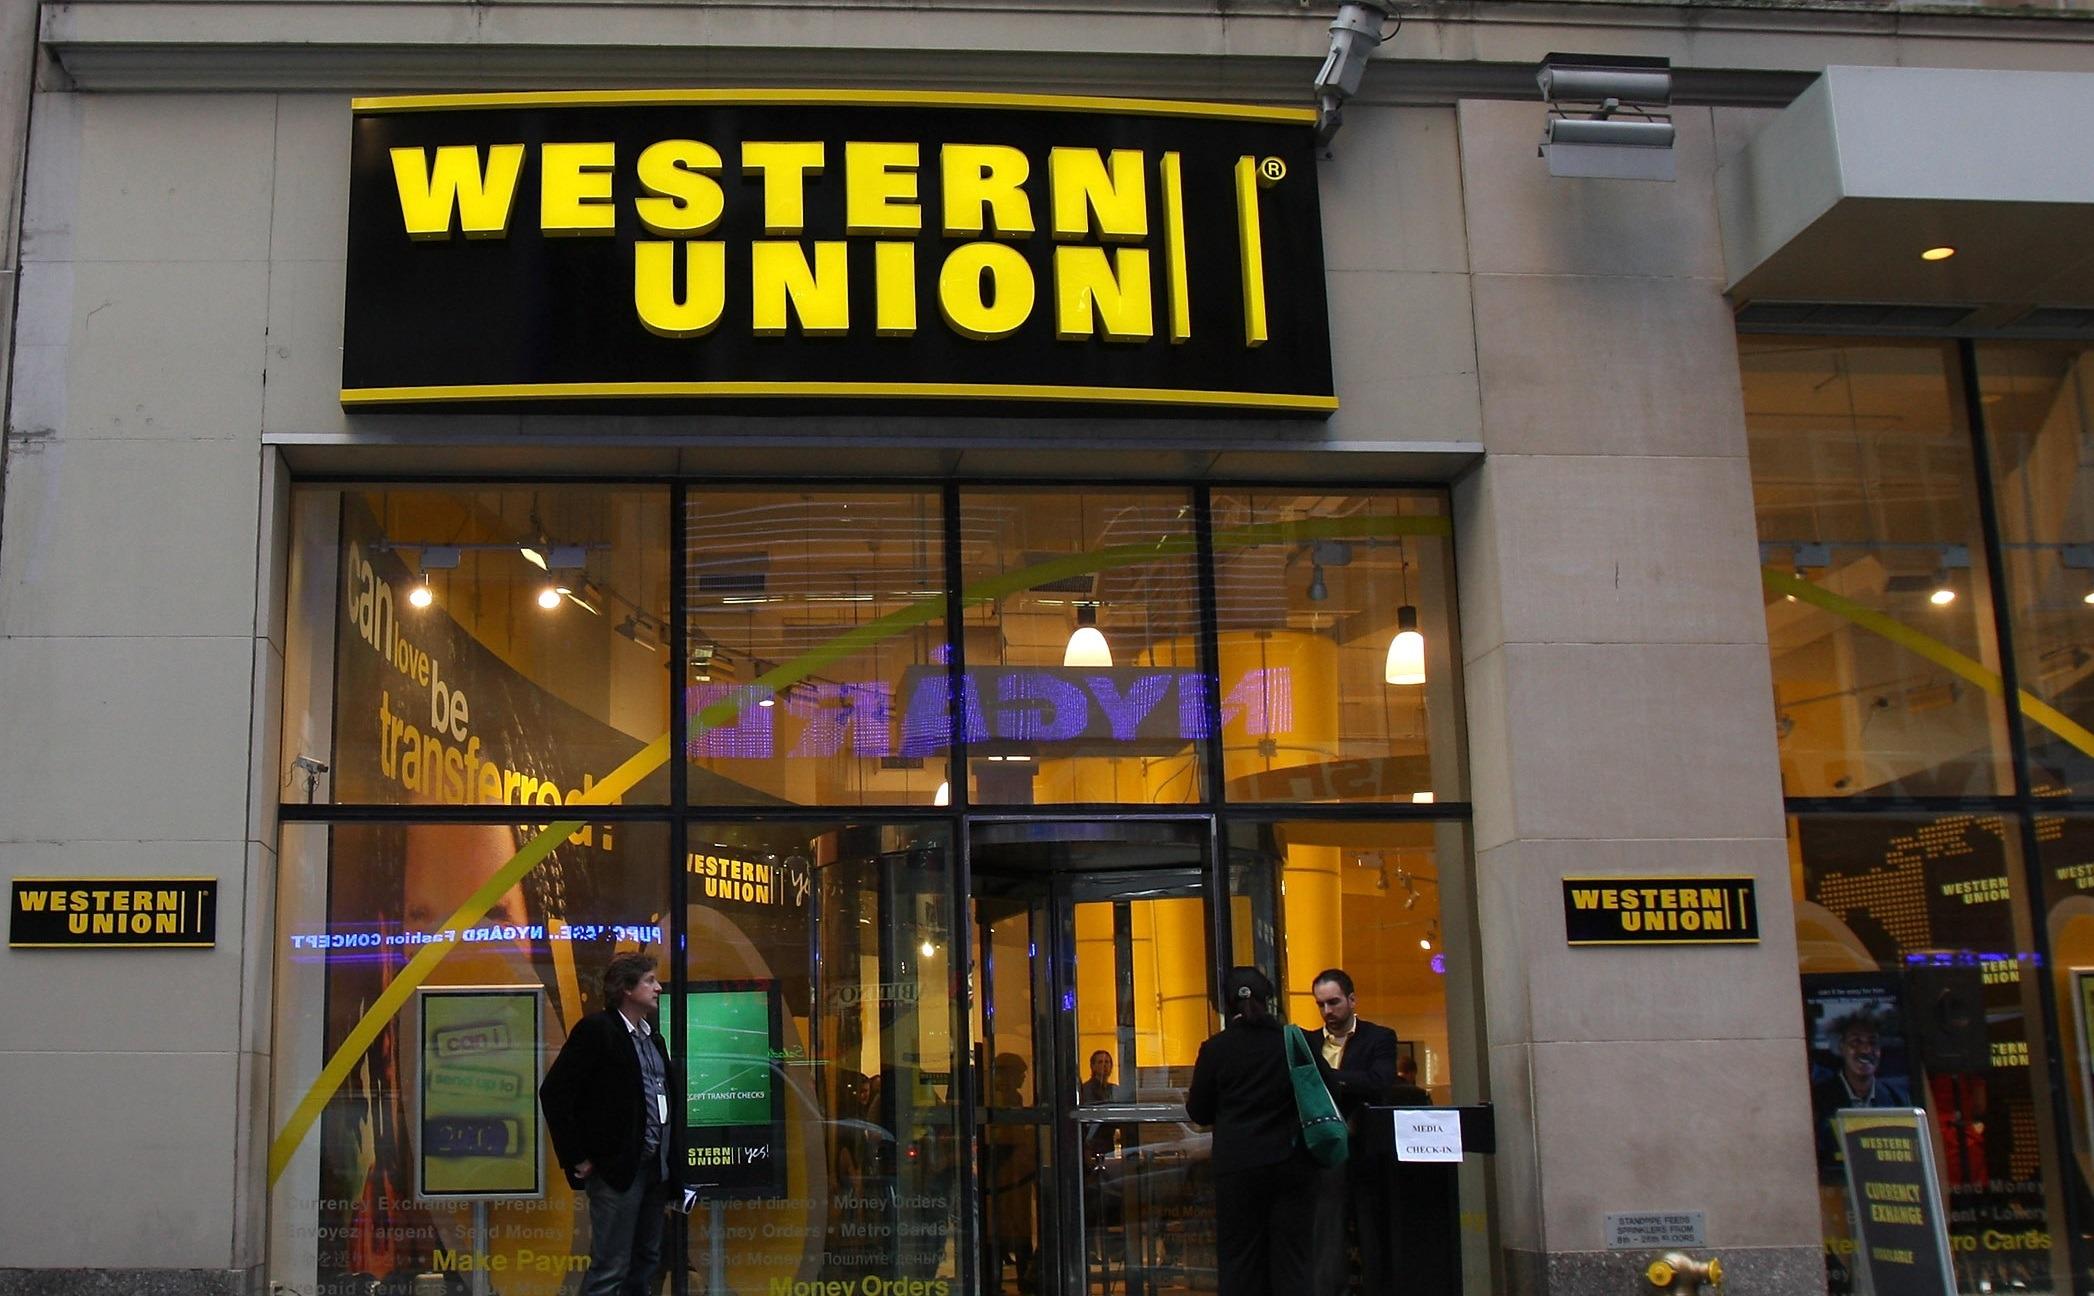 Western Union Dollar to Naira exchange rate